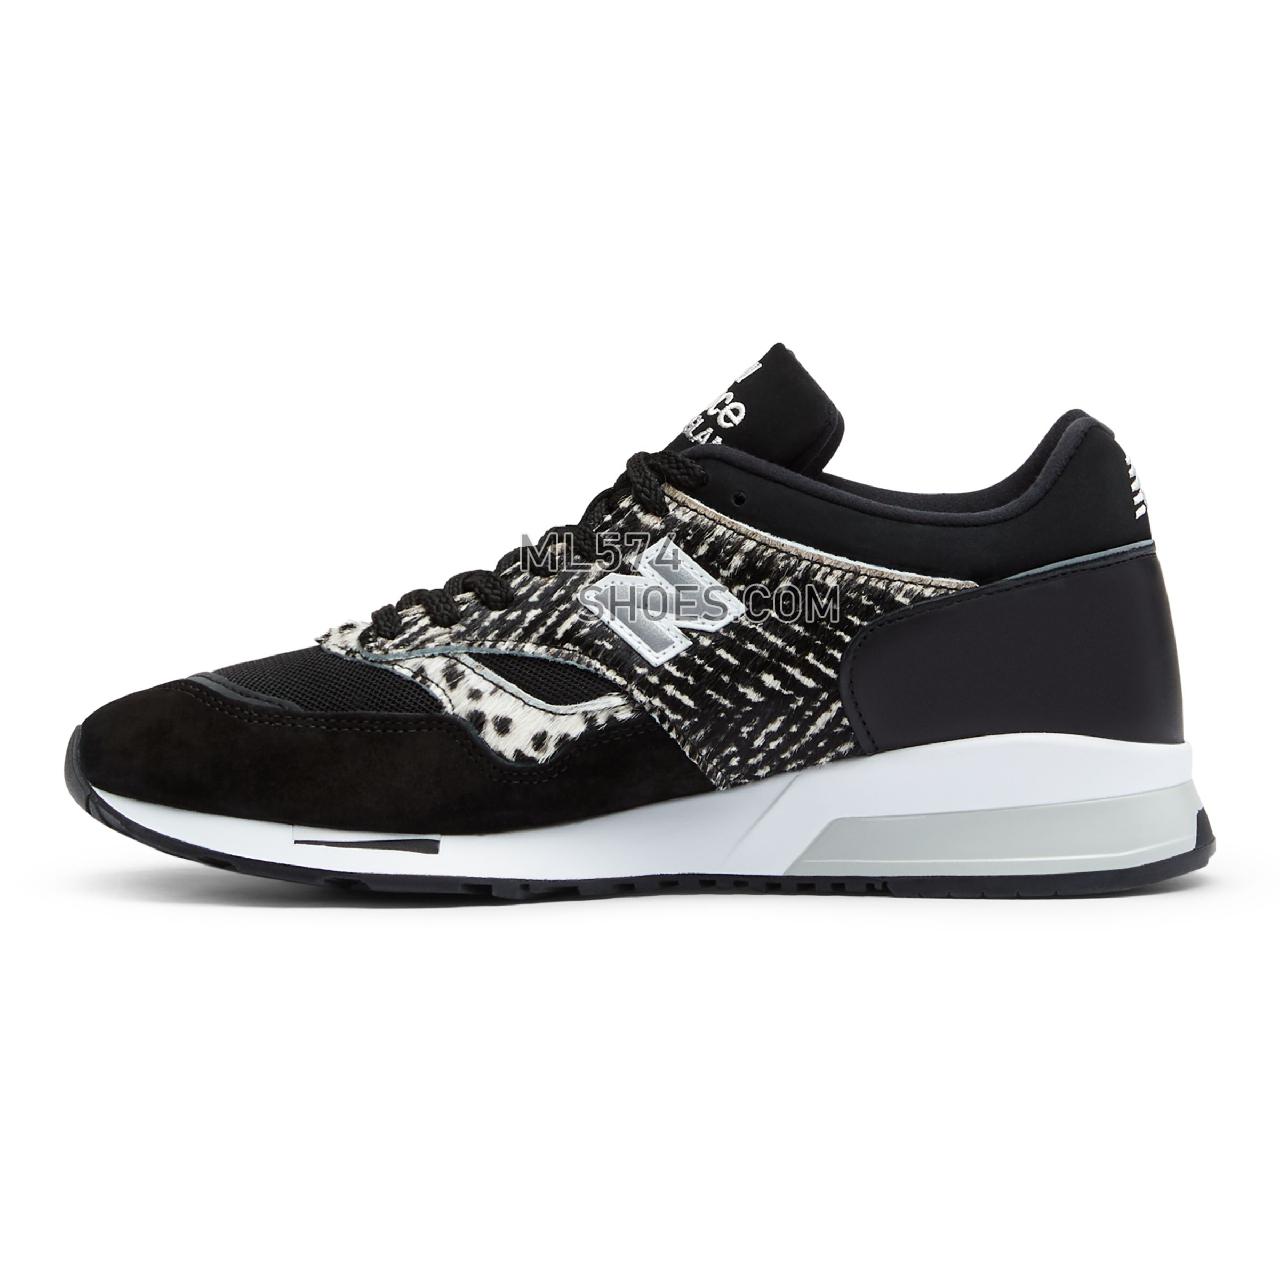 New Balance MADE in UK 1500 - Men's Made in USA And UK Sneakers - Black with White and Silver - M1500ZDK